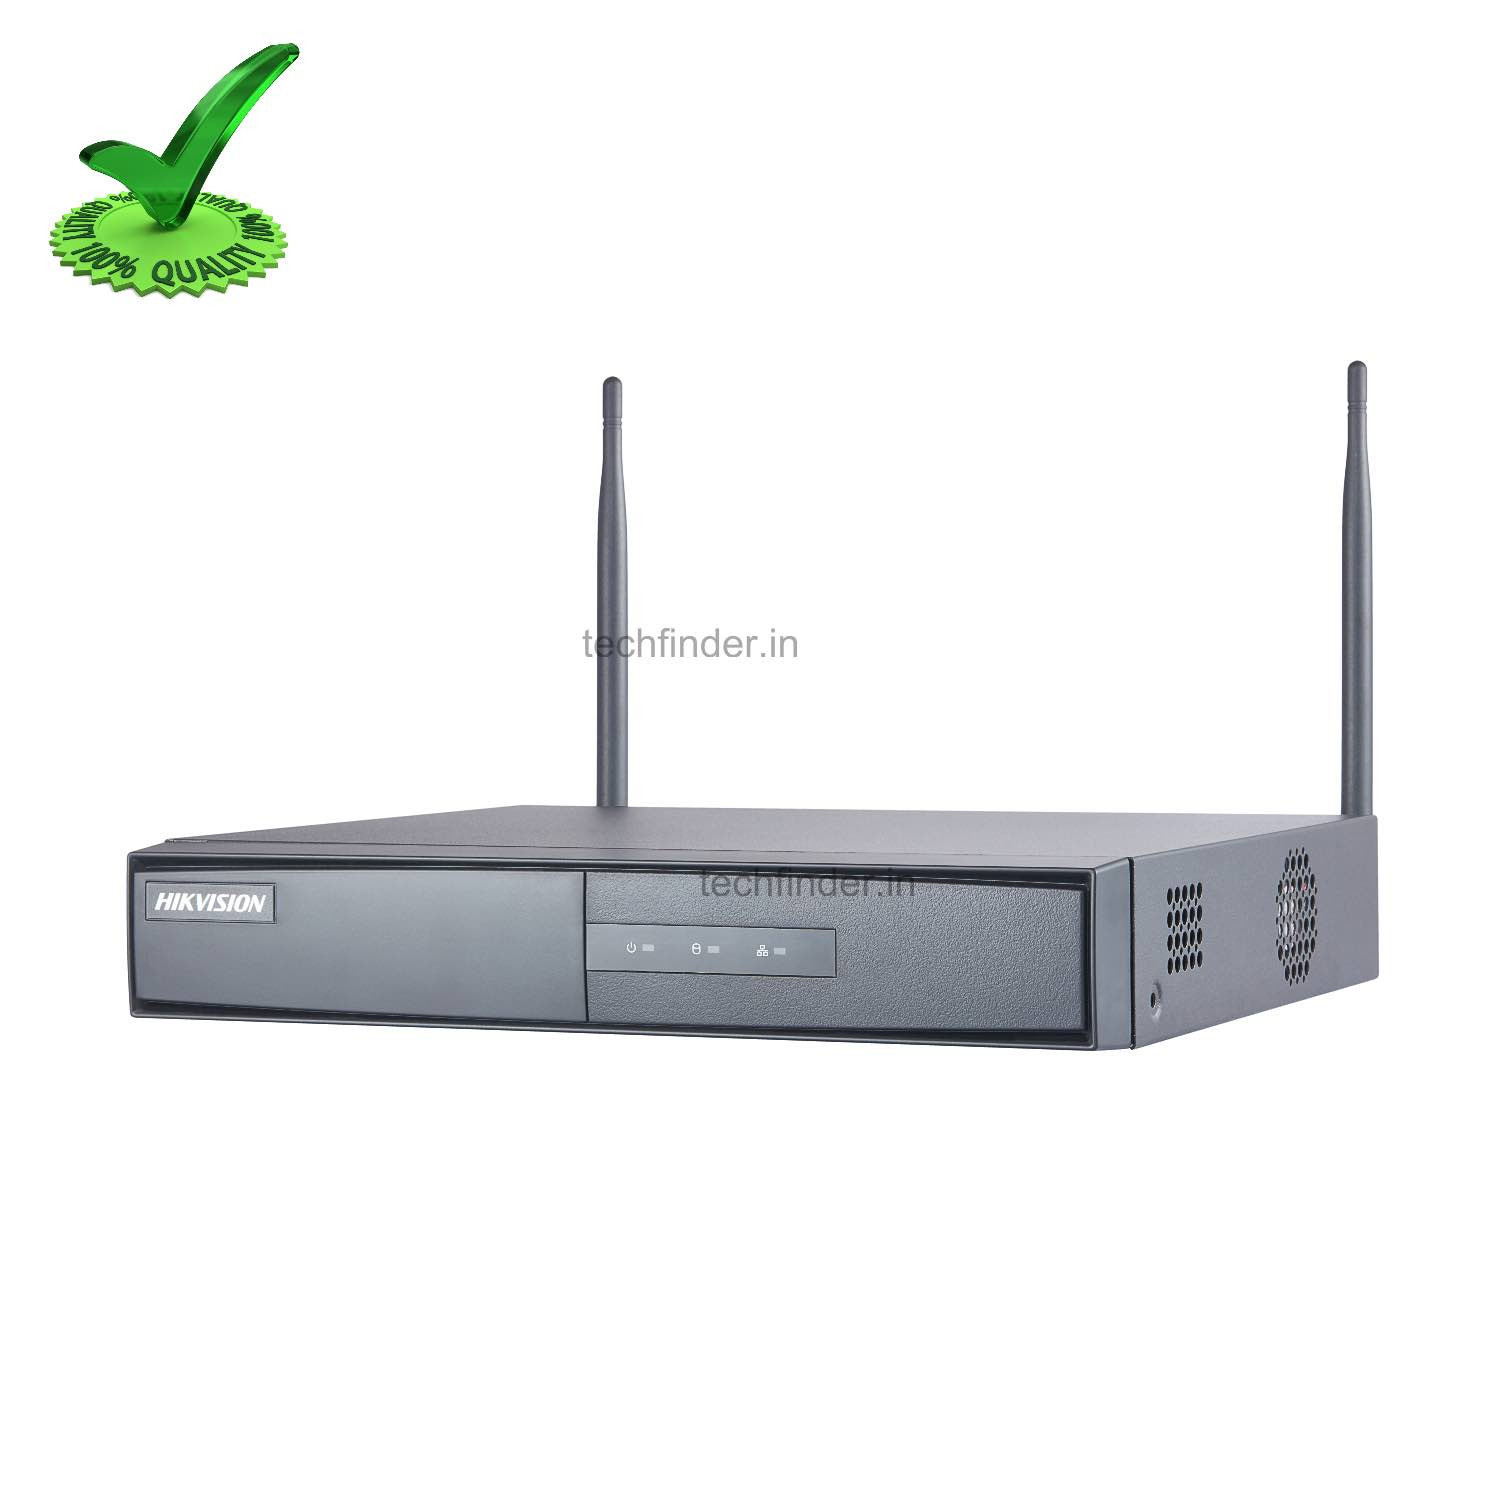 Hikvision DS-7608NI-K1/W 8CH HD NVR